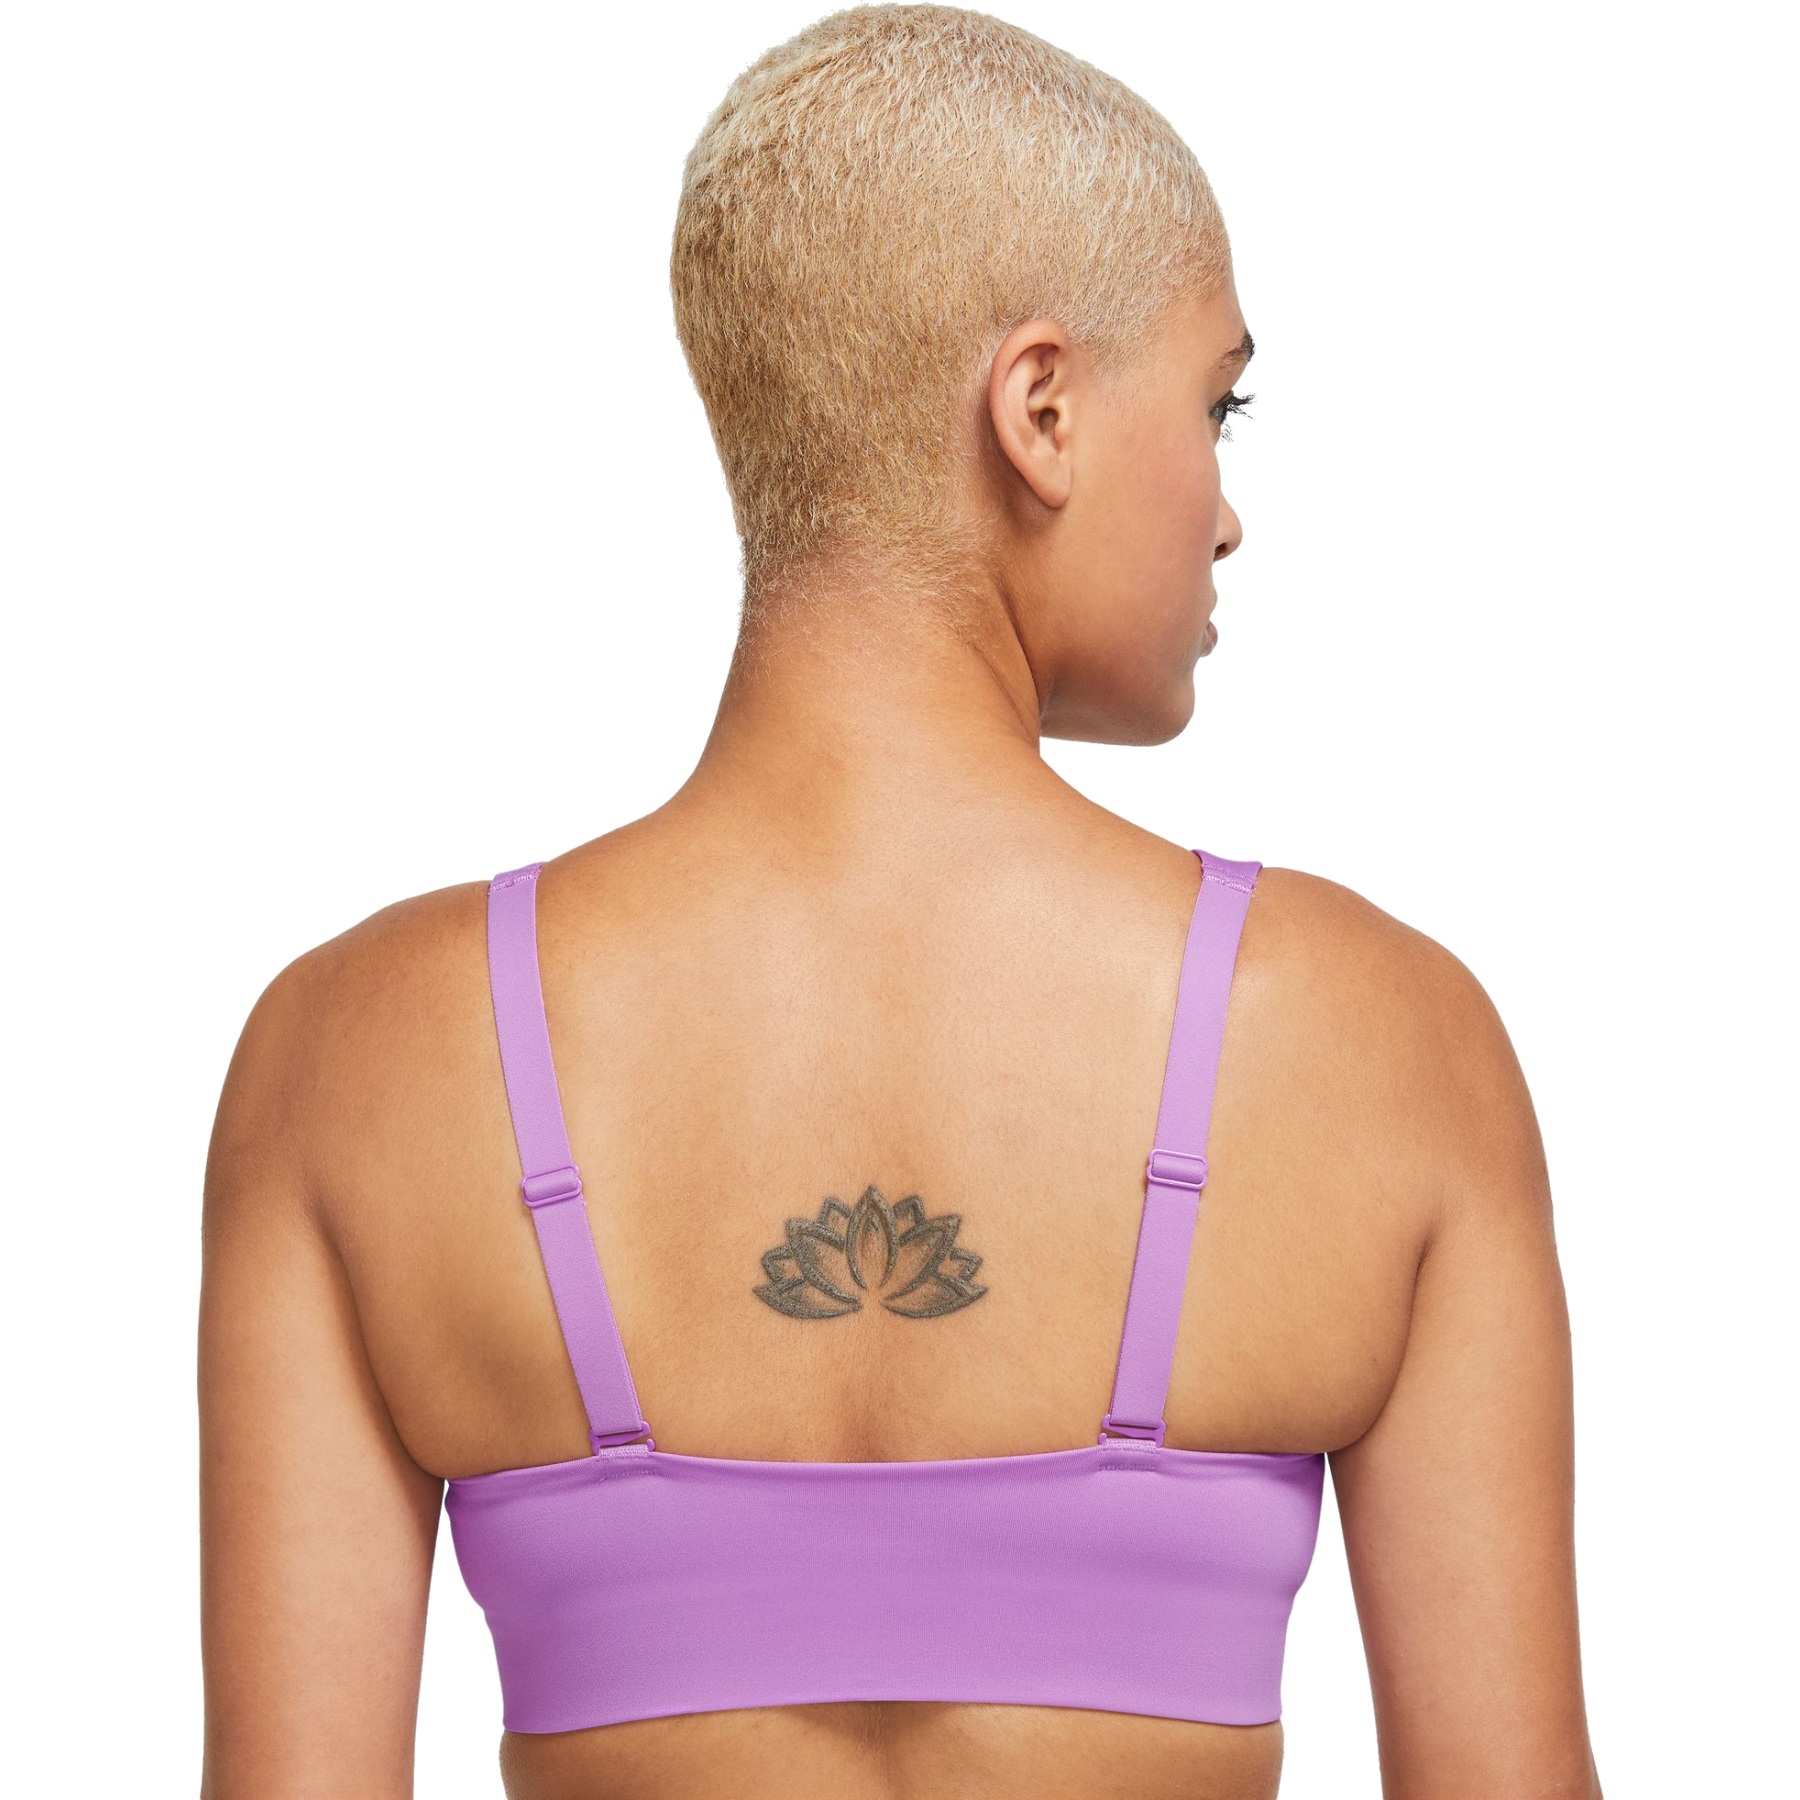 Nike Indy Women's Light-support Sports Bra - Pink from Nike on 21 Buttons